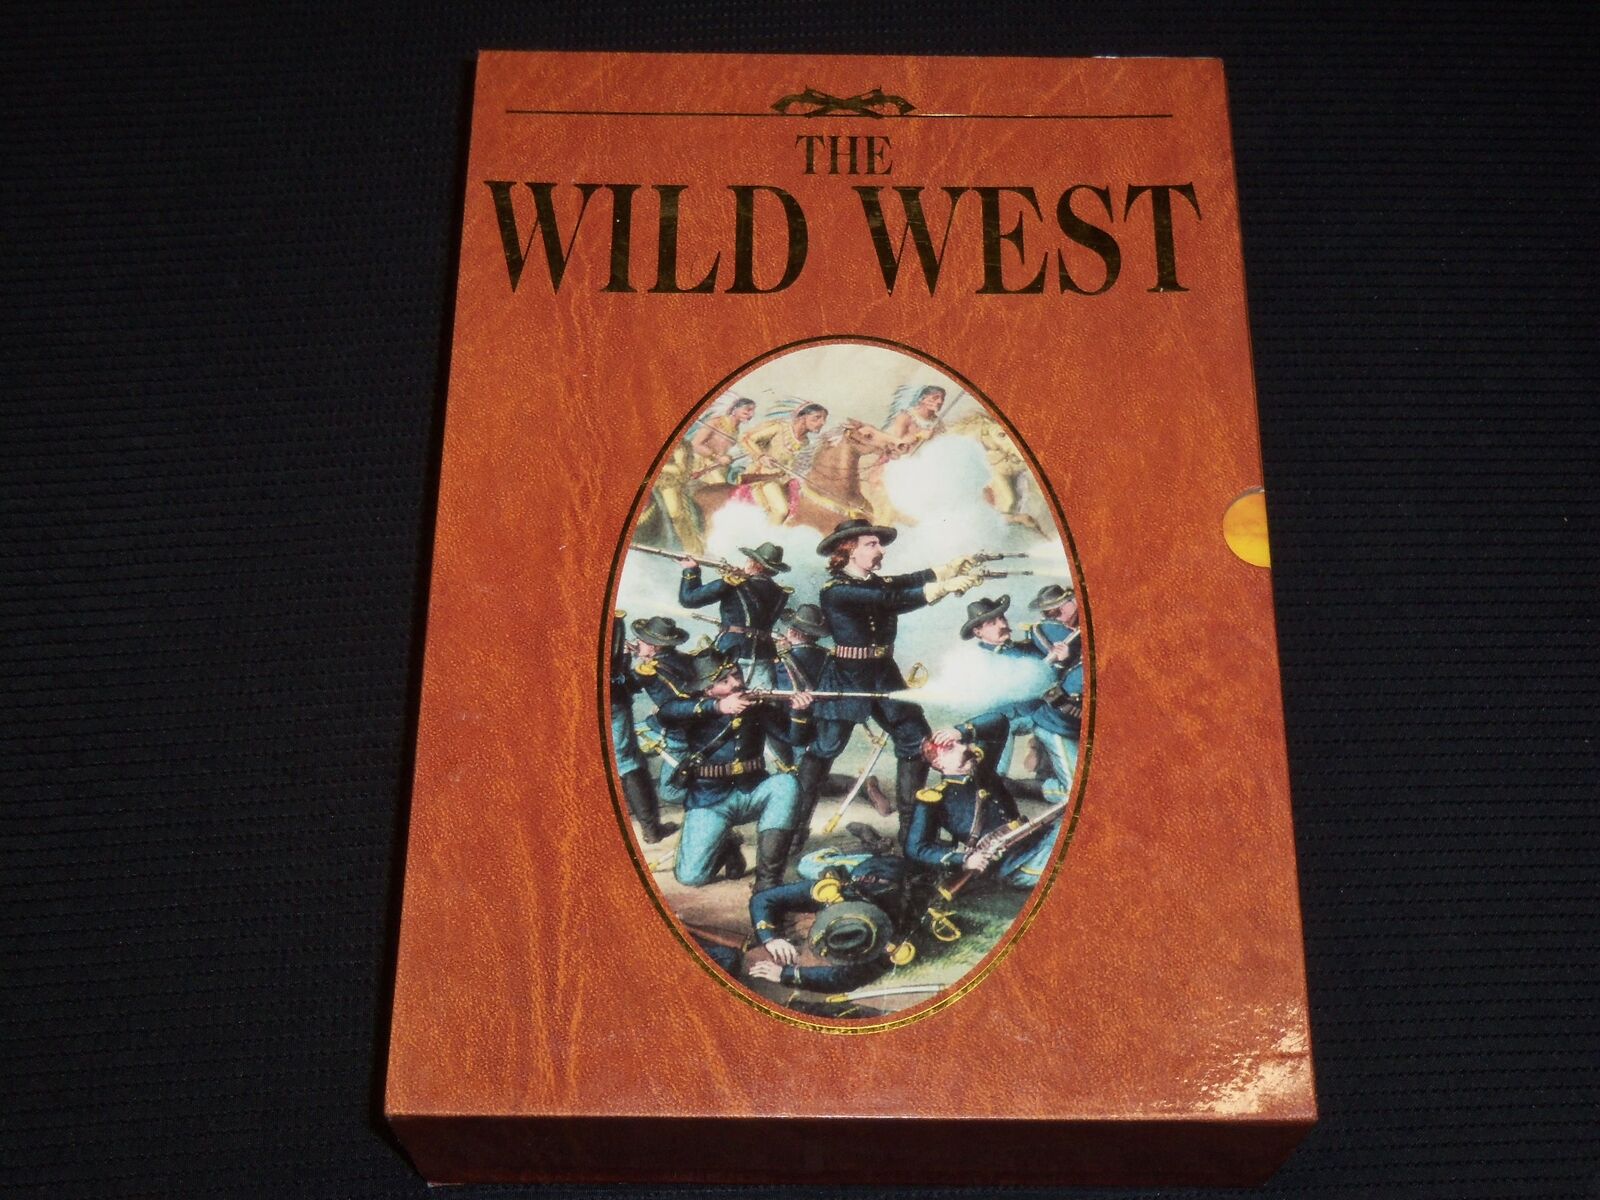 2000 THE WILD WEST BOOKS BOXED SET OF 3 - HARDCOVER - GREAT PHOTOS - KD 5676C